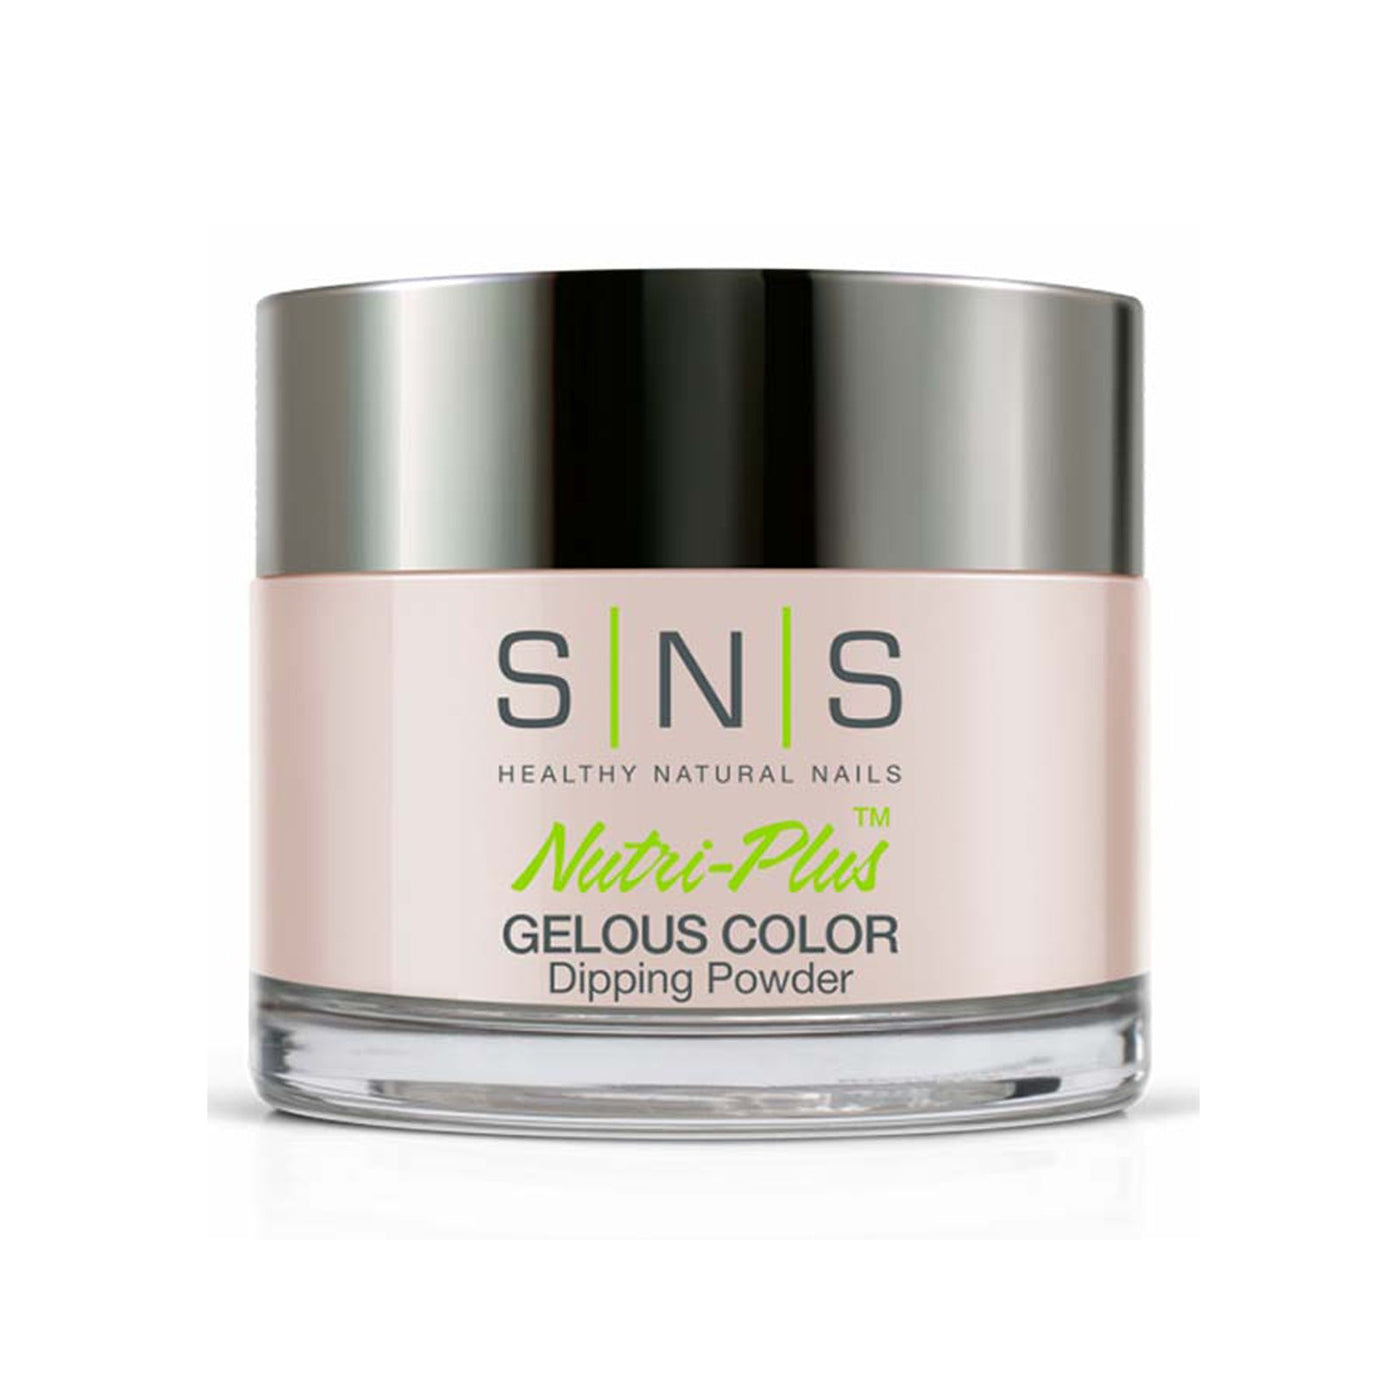 SNS Gelous Color Dipping Powder SY08 Don't Be Coy (43g) packaging